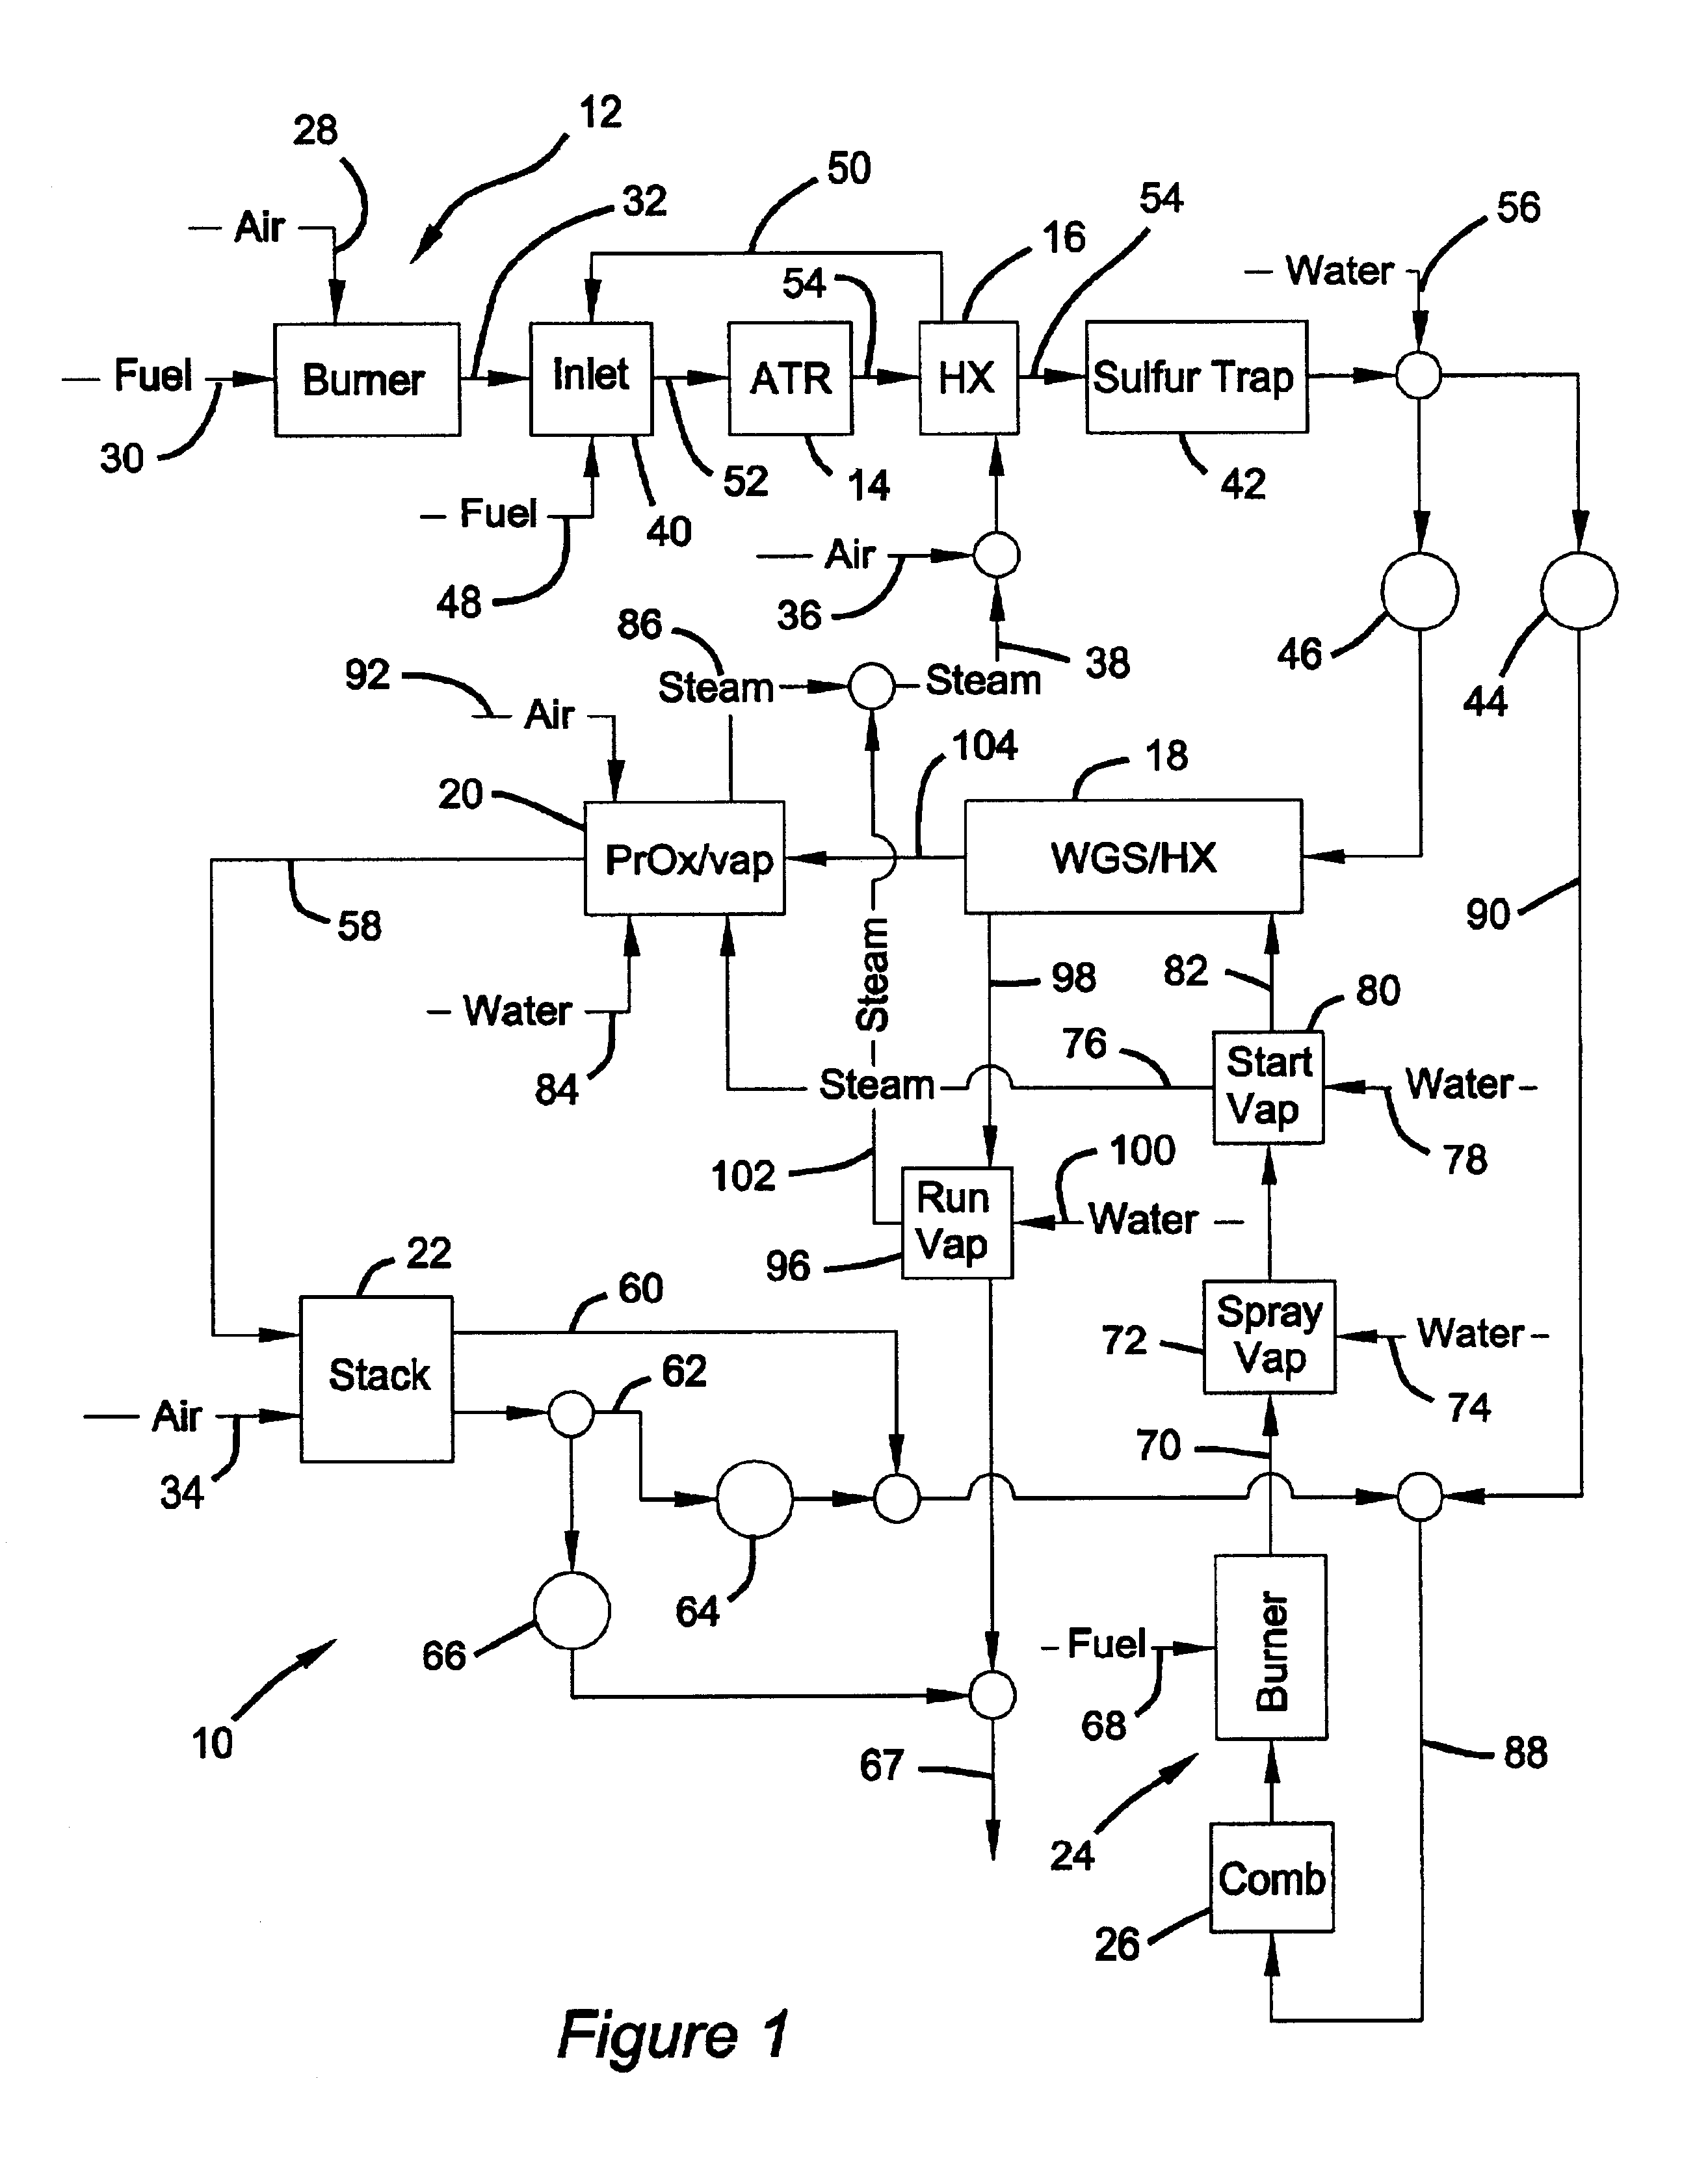 Staged lean combustion for rapid start of a fuel processor